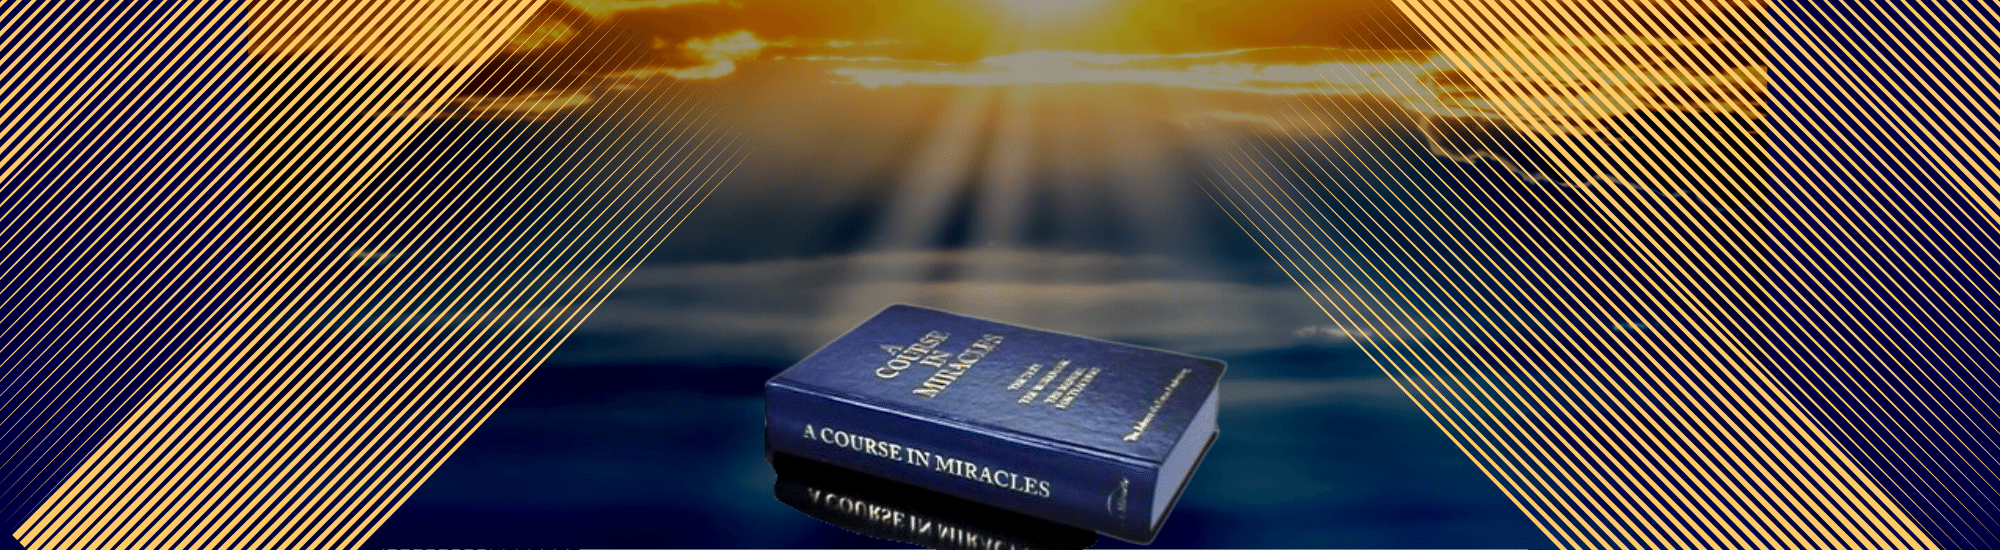 A Course in Miracles book